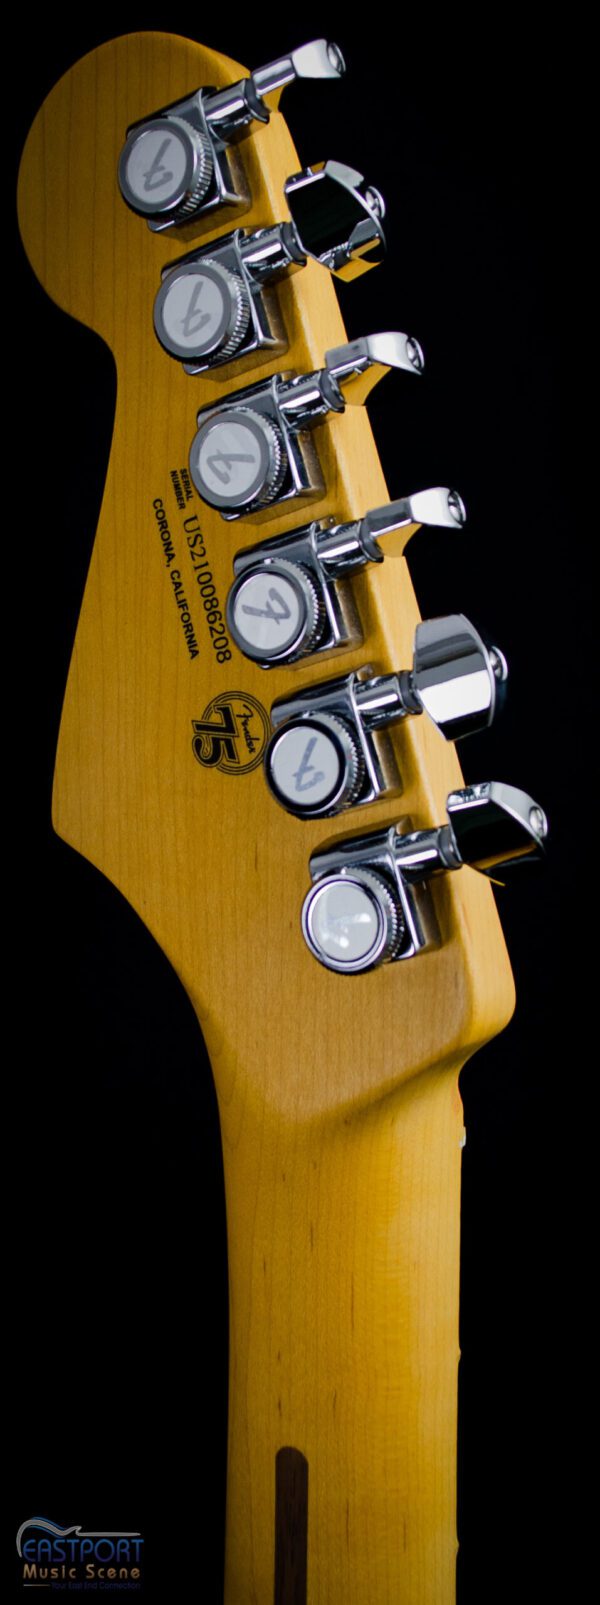 A close up of the controls on an electric guitar.